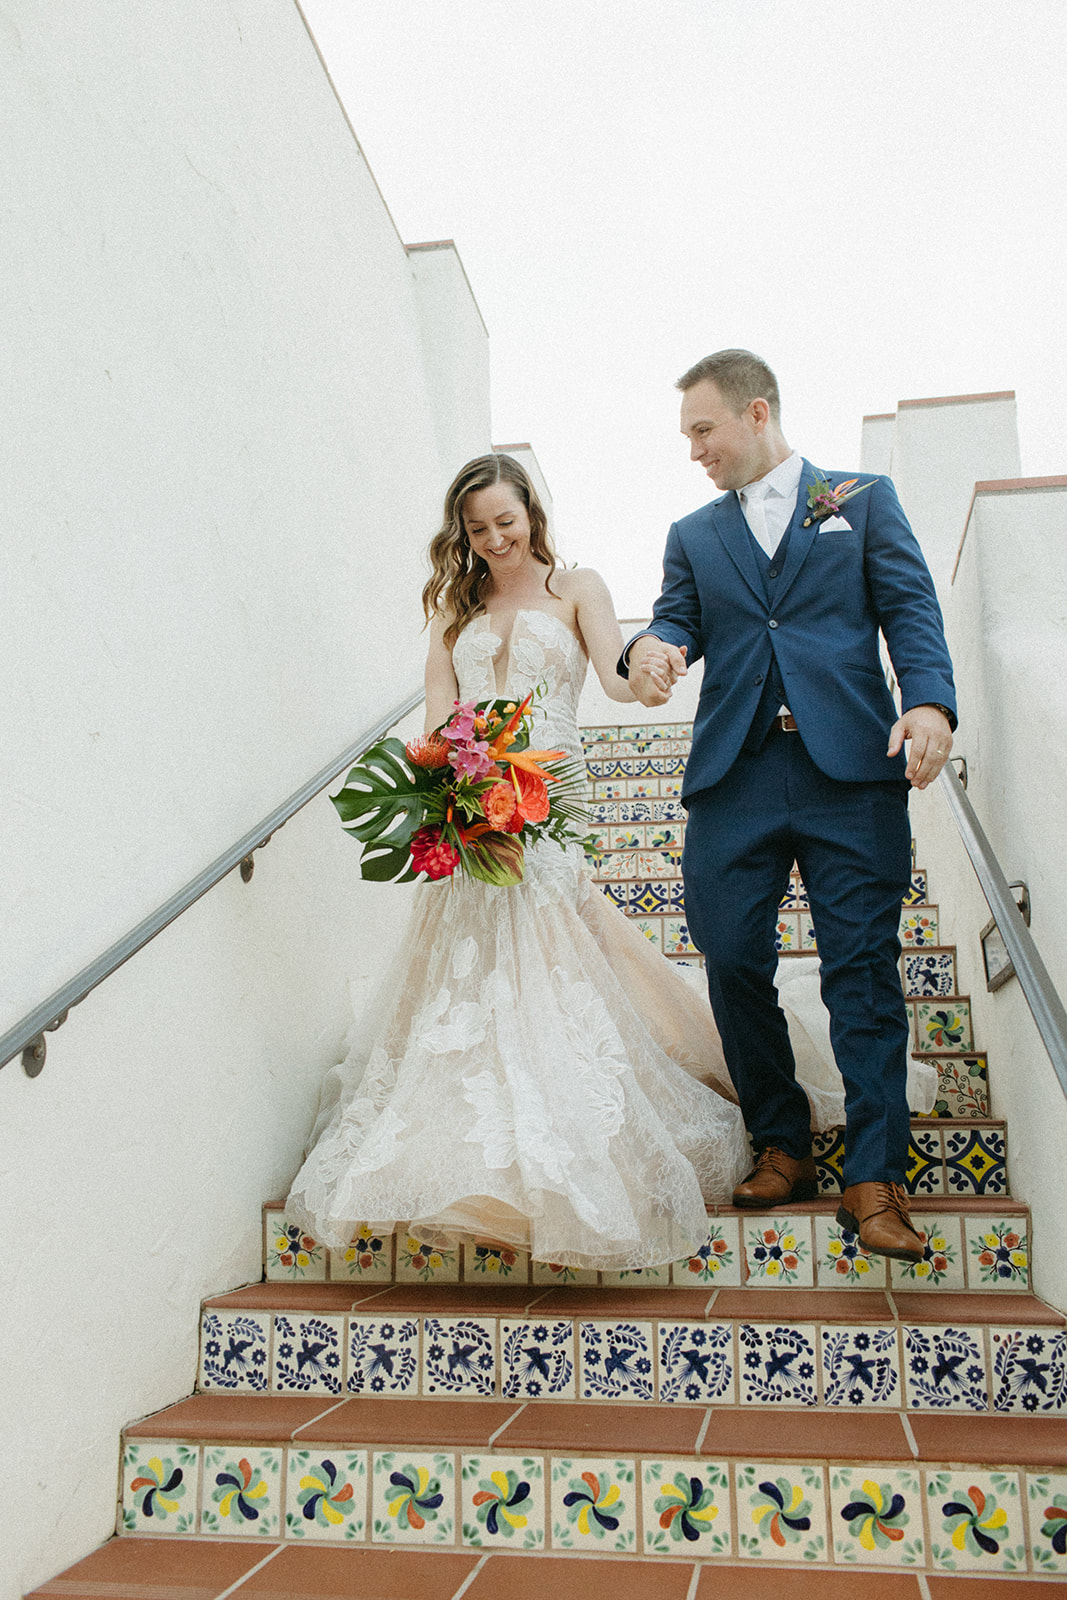 bride in strapless champagne with lace overlay mermaid wedding dress and tropical bouquet walks with groom in blue suit with white tie down Spanish tiled staircase